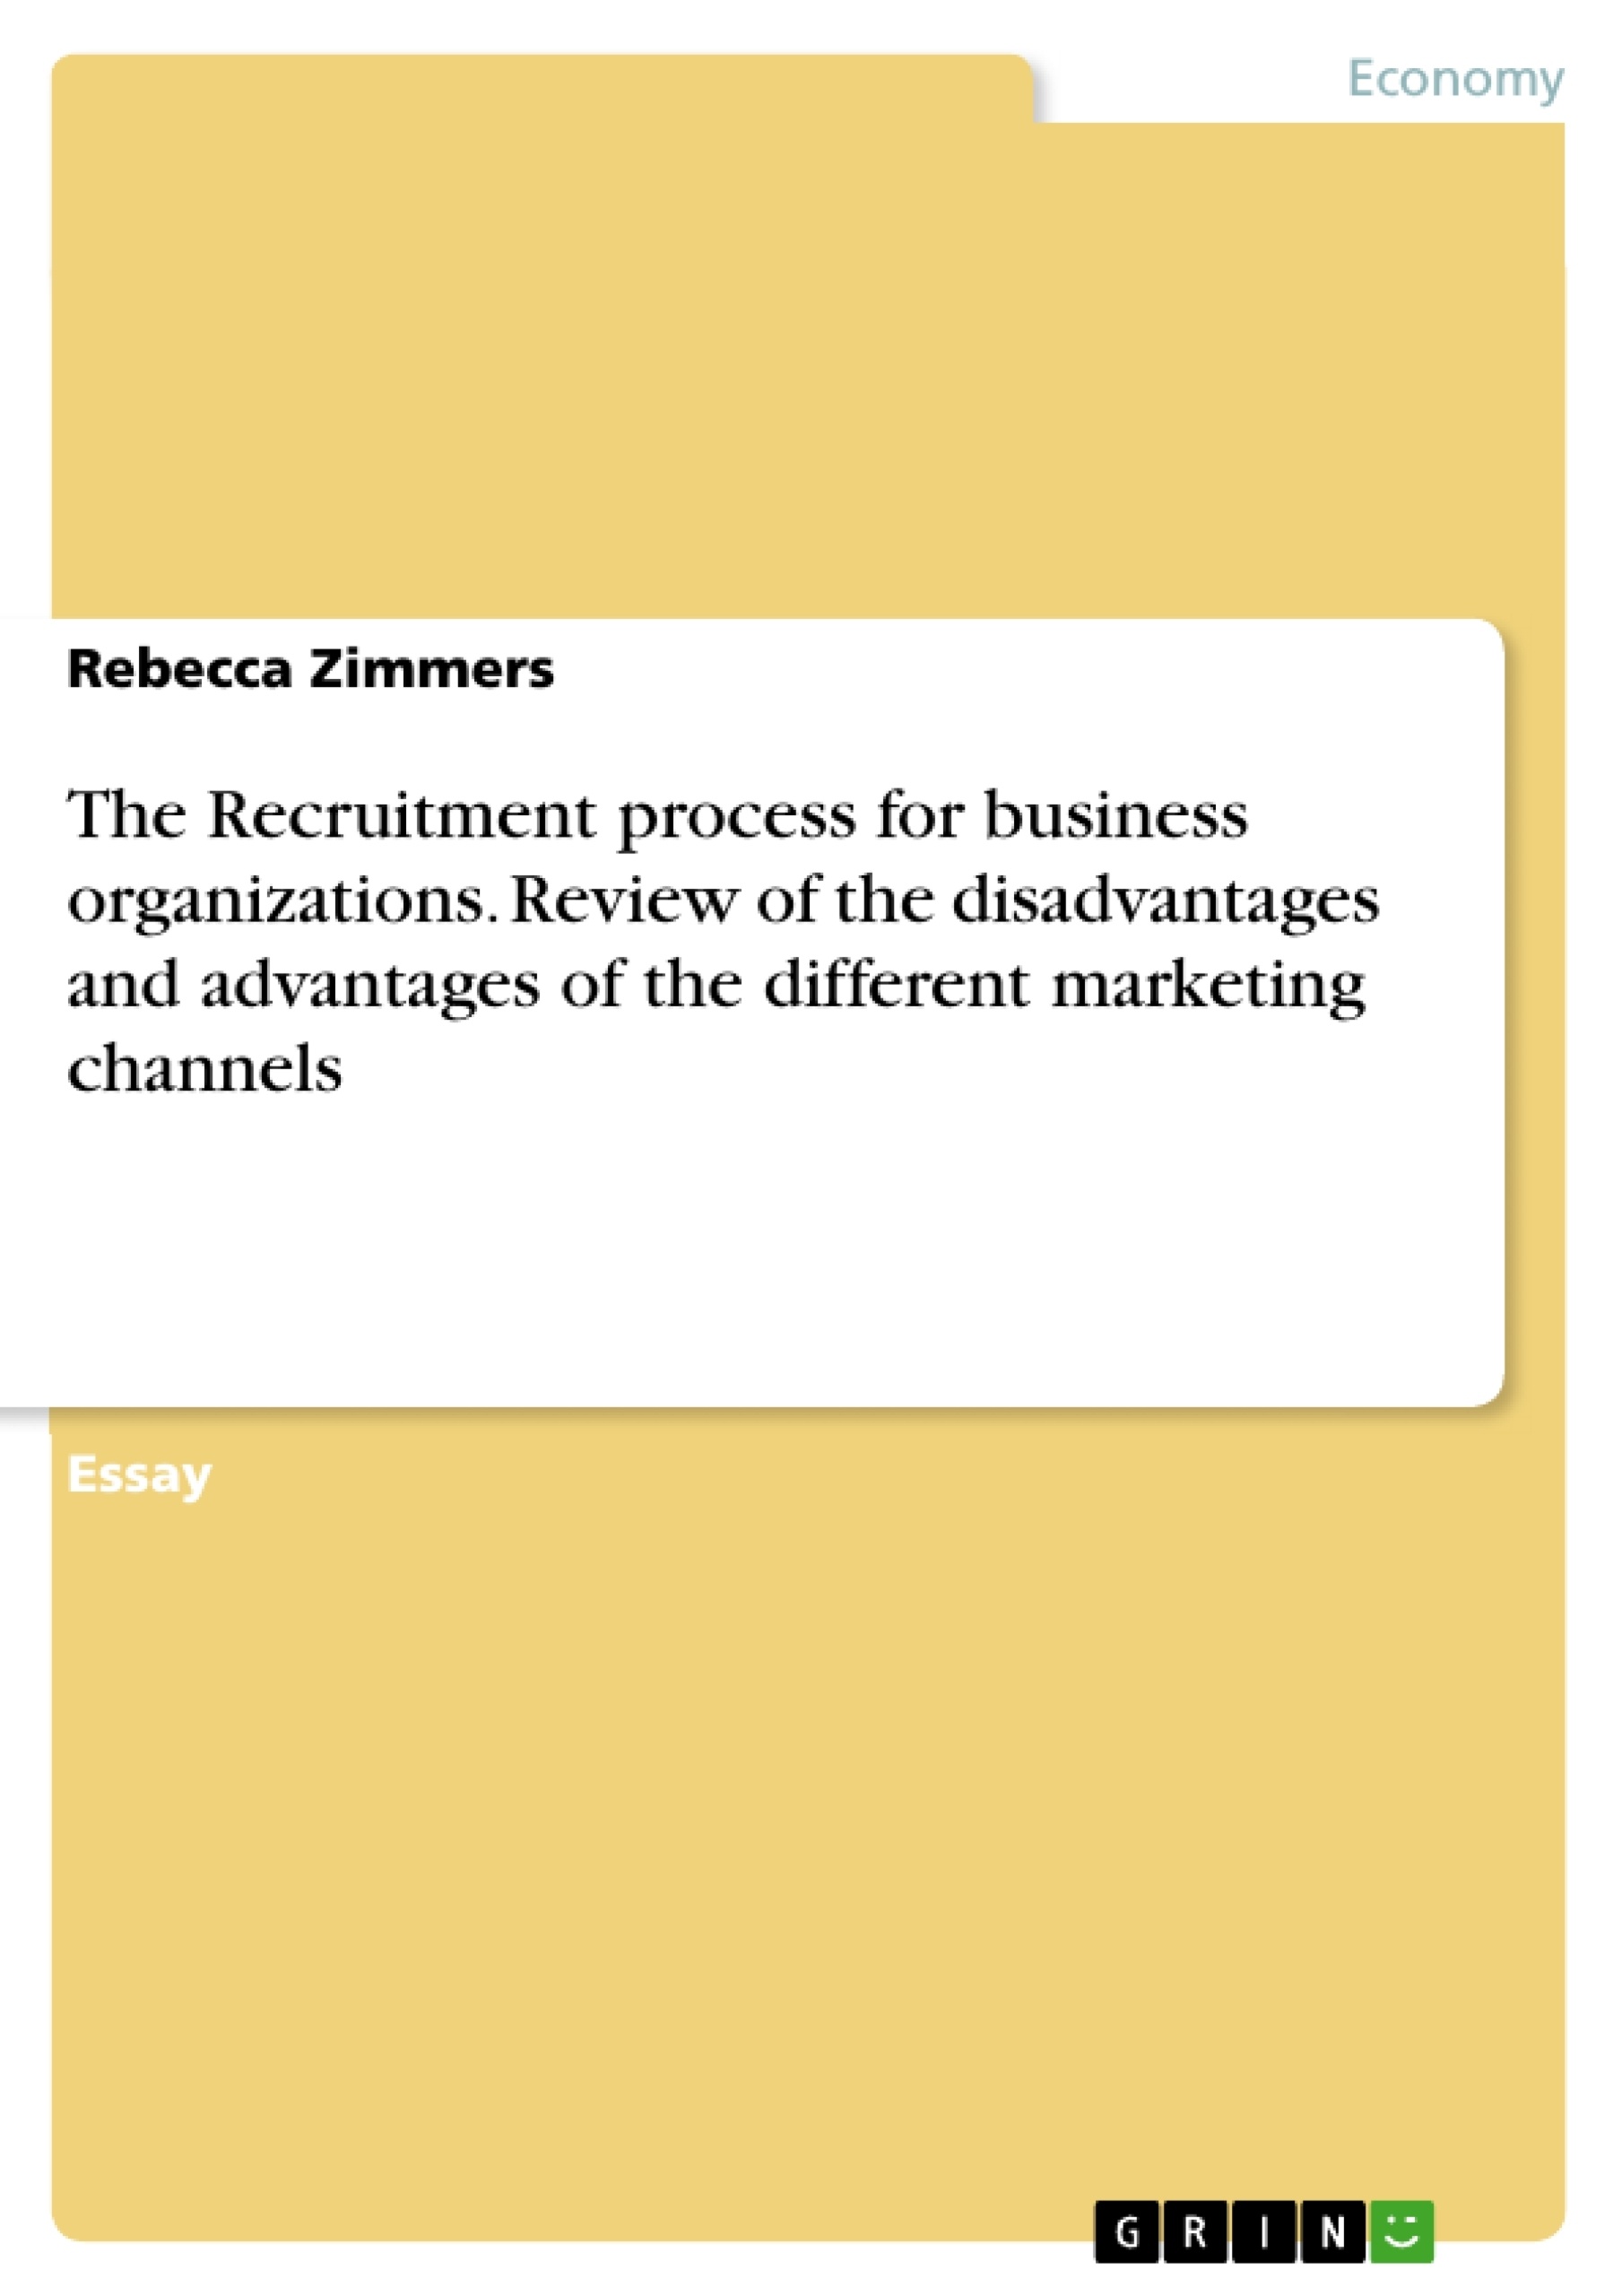 Title: The Recruitment process for business organizations. Review of the disadvantages and advantages of the different marketing channels